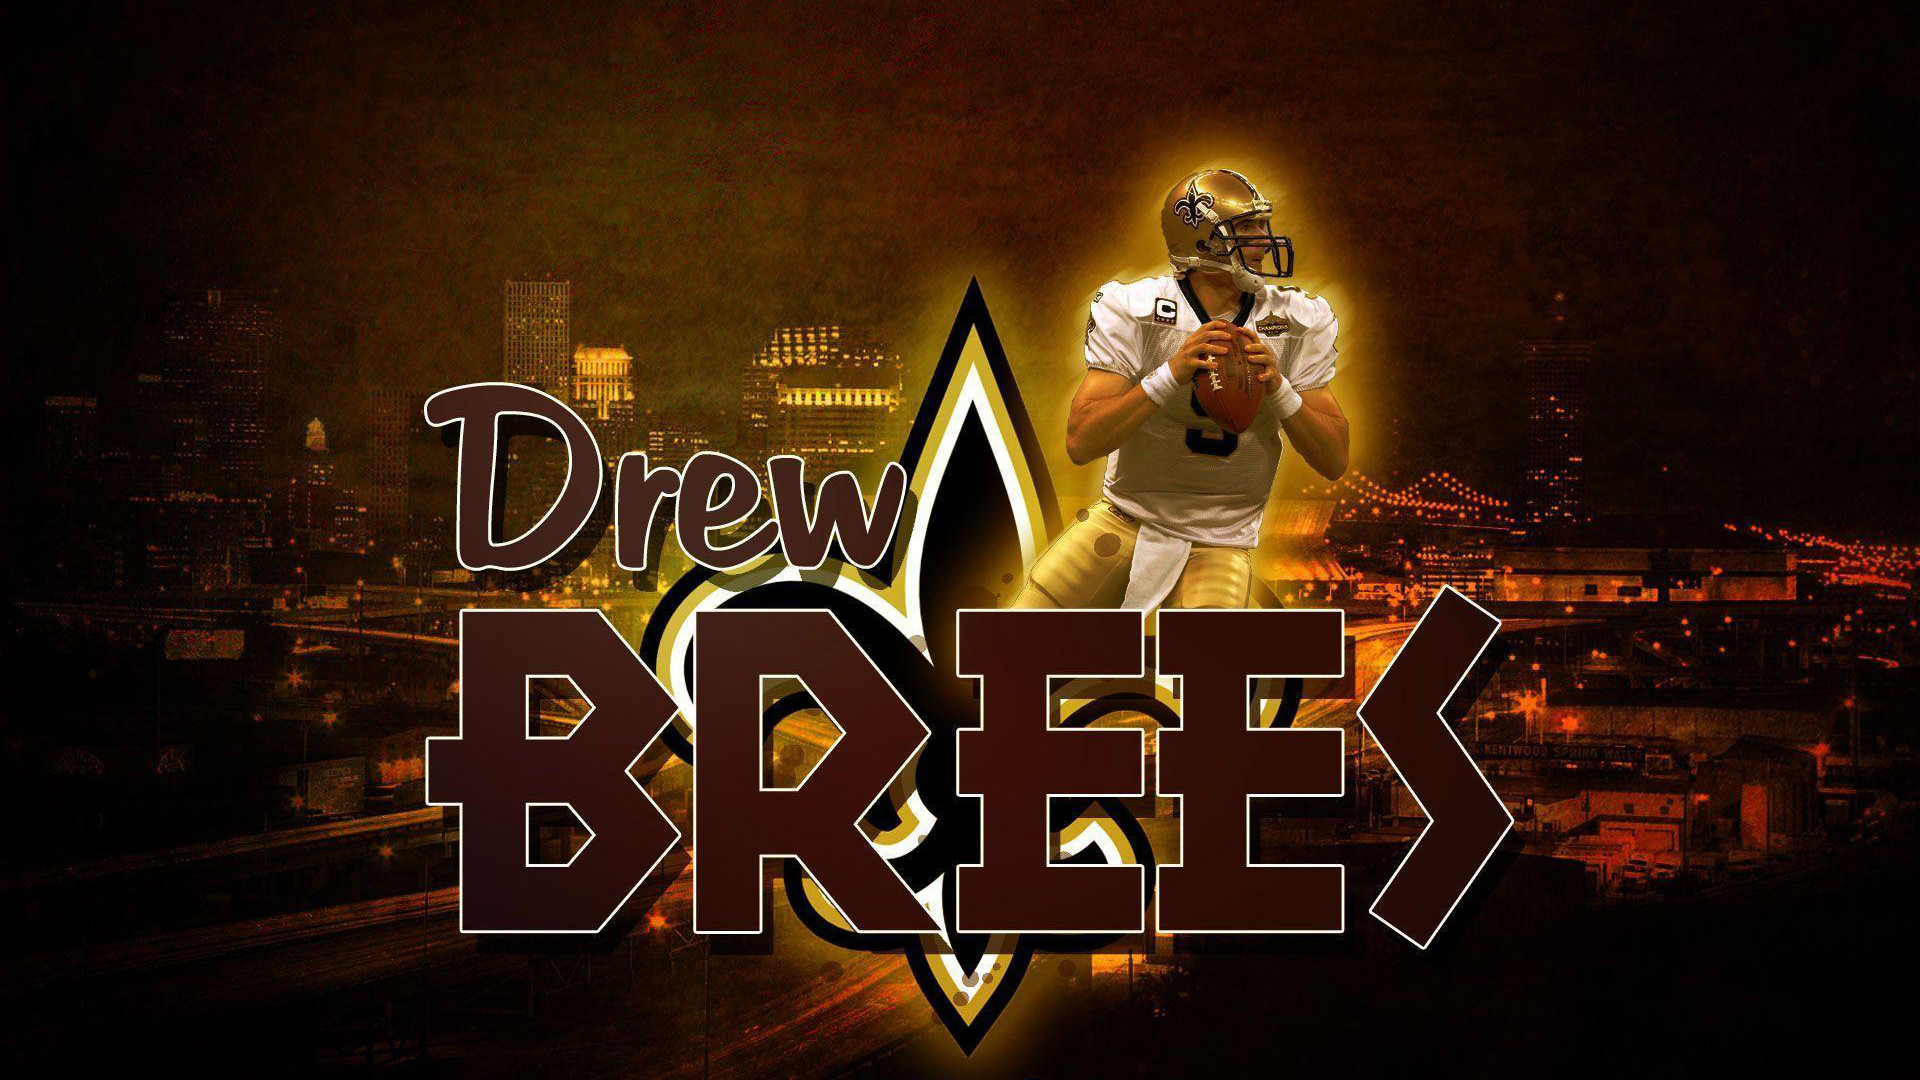 Drew Brees With Wallpaper Of Cityscape Lights During Nighttime 2K Drew Brees